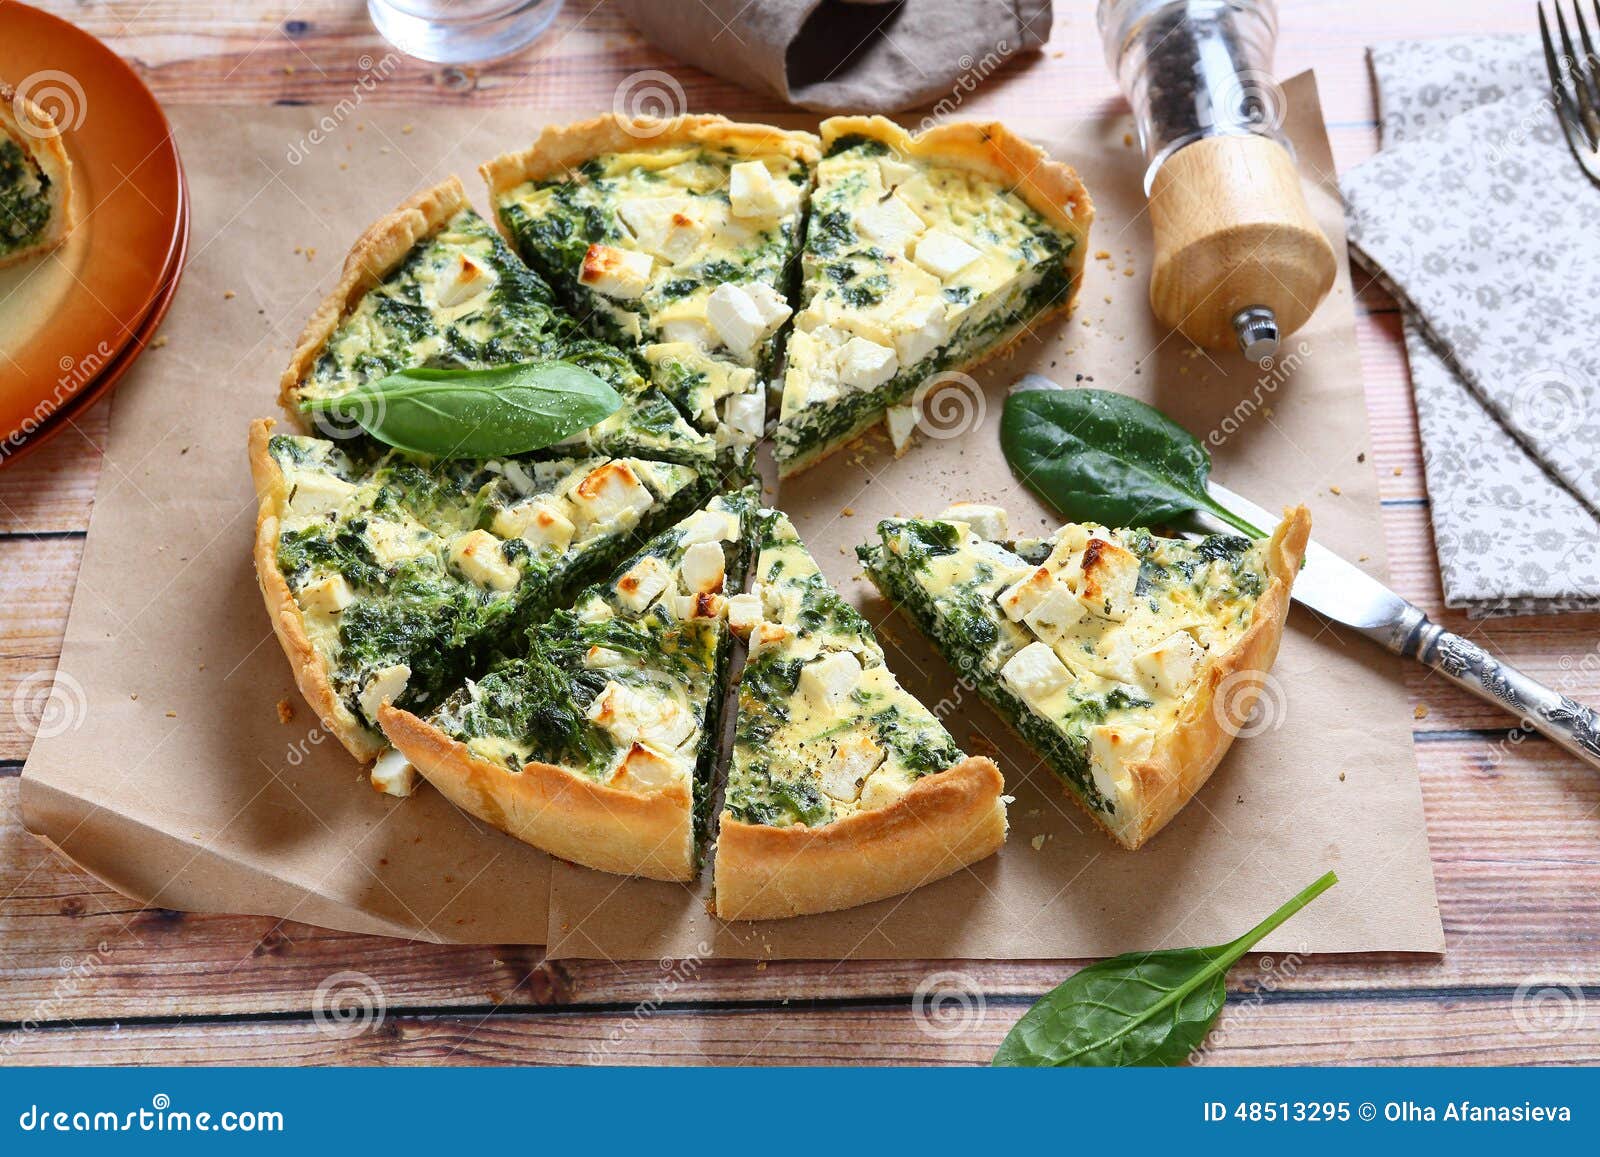 Pie with Spinach and Feta Cheese Stock Image - Image of slice, snack ...